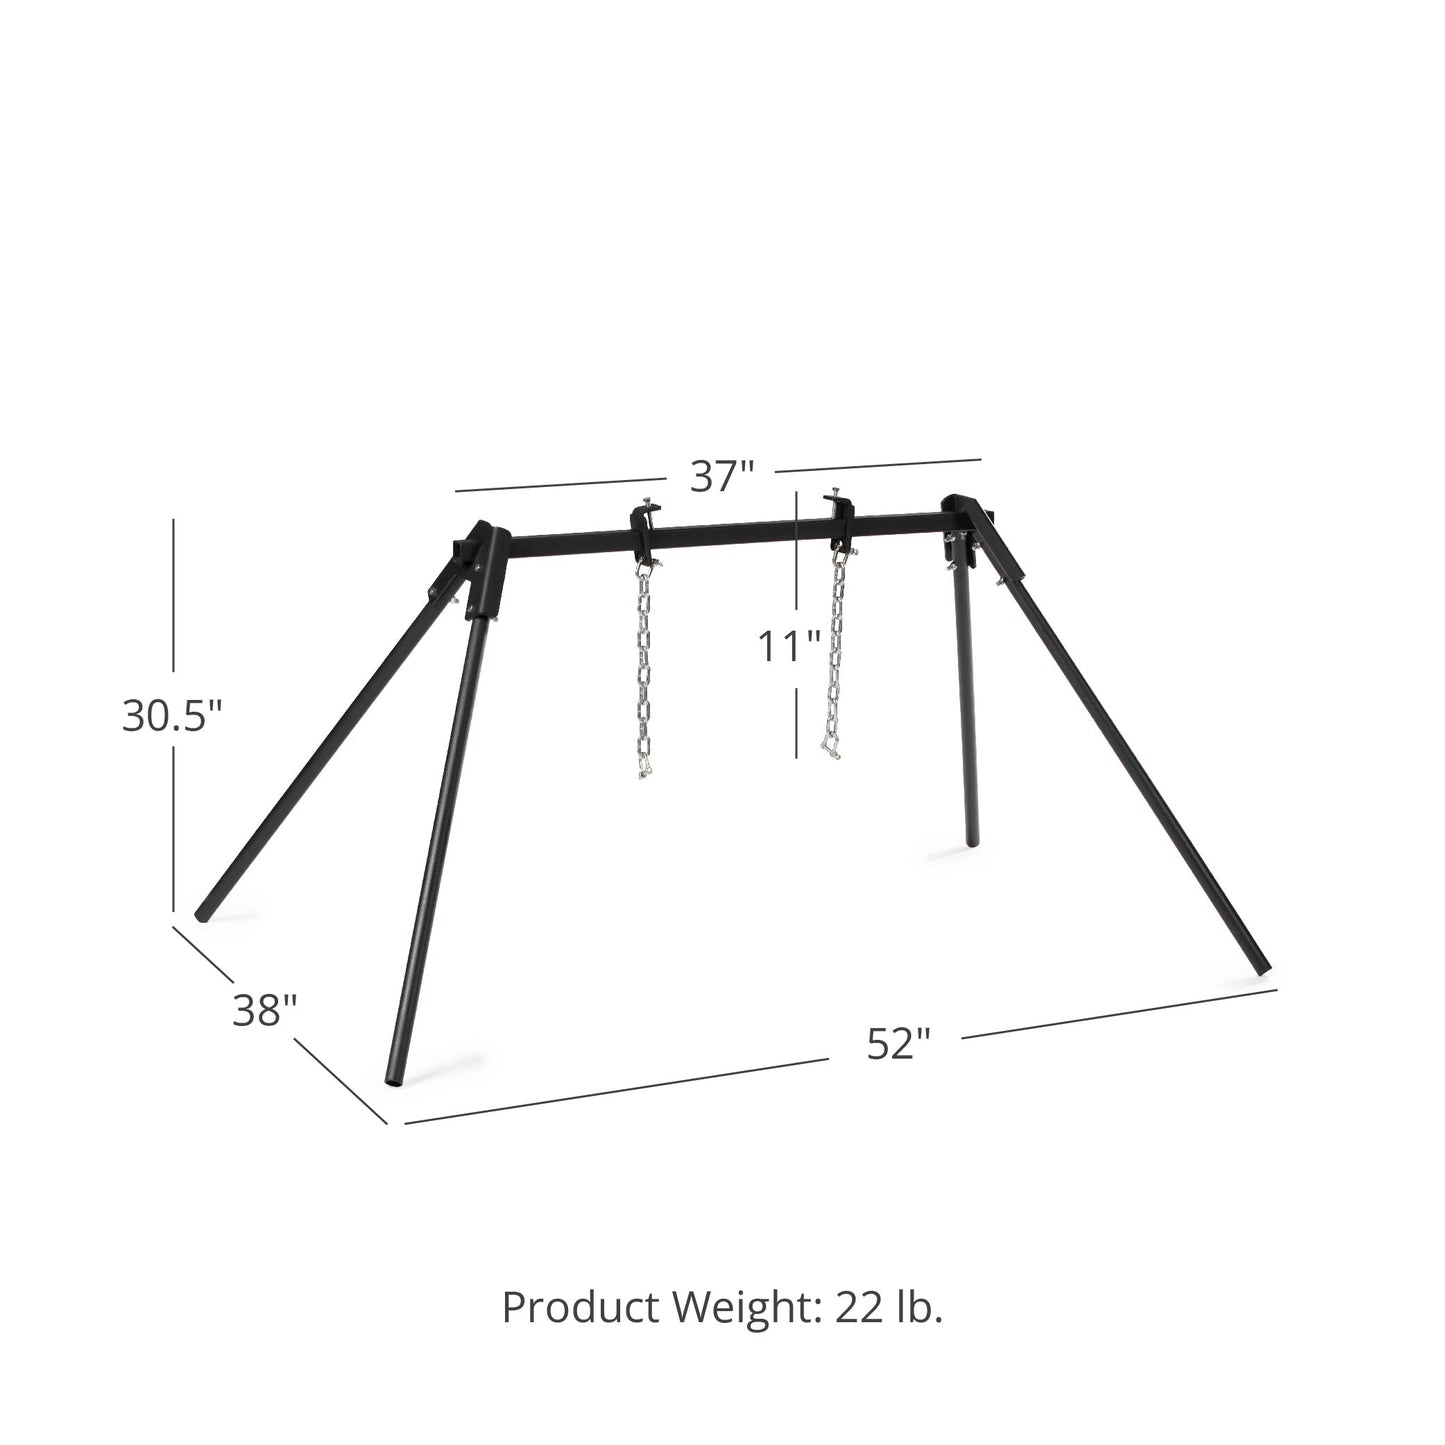 Single Gong Steel Target Stand - view 6